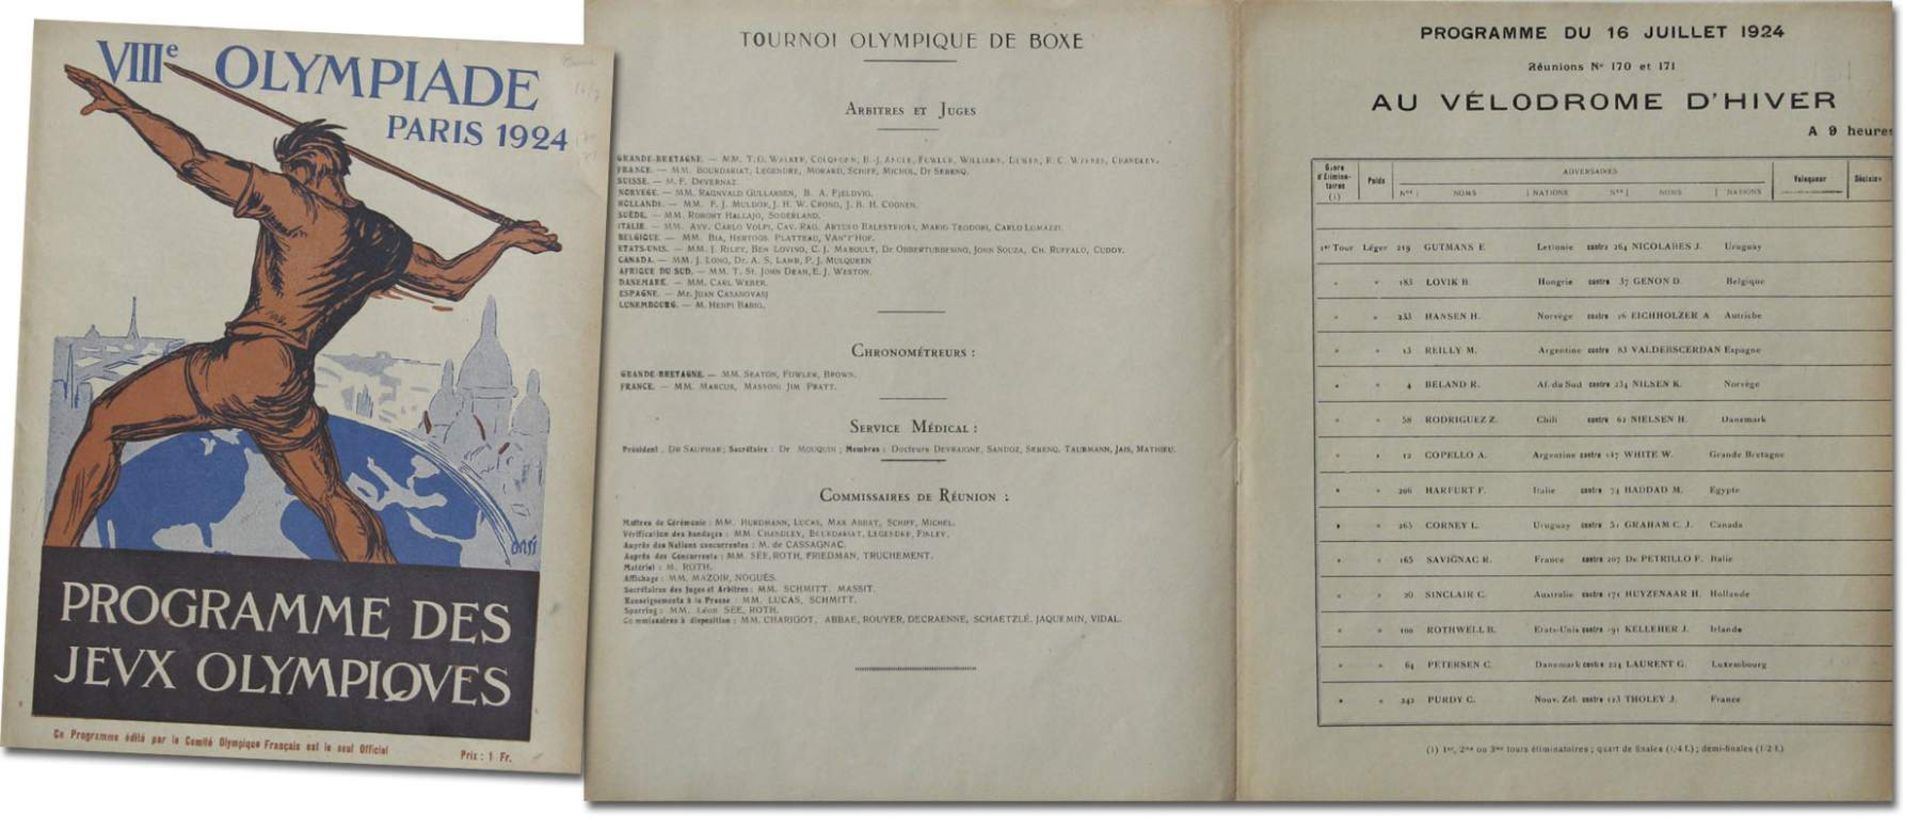 Olympic Games Paris 1924 Official Programm Boxing - Official daily programme VIIIth Olympiade